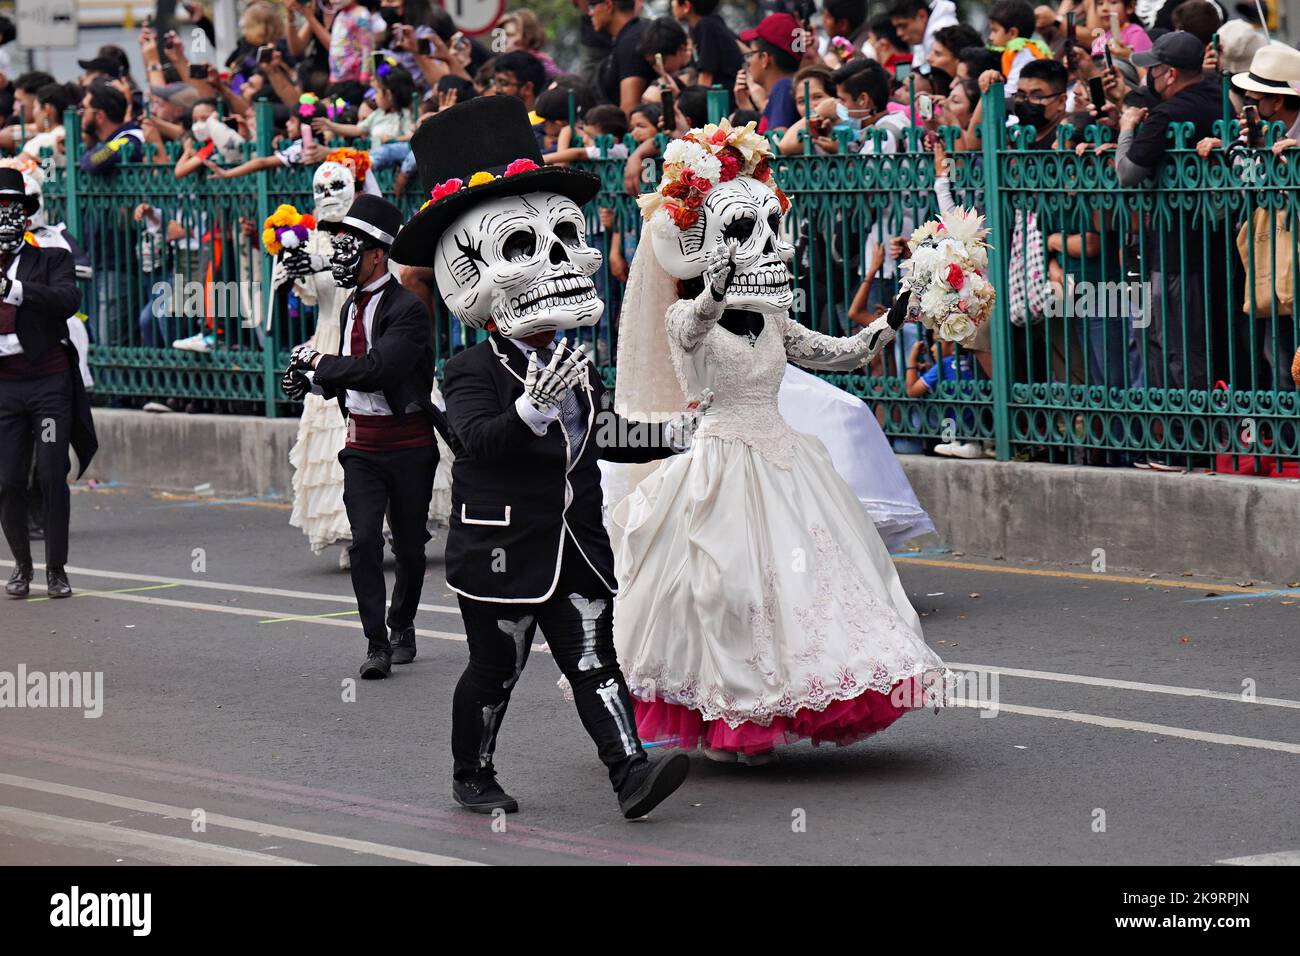 Mexico City, Mexico. 29th Oct, 2022. Performers wearing giant skull masks wave to spectators during the Grand Parade of the Dead to celebrate Dia de los Muertos holiday on Paseo de la Reforma, October 29, 2022 in Mexico City, Mexico. Credit: Richard Ellis/Richard Ellis/Alamy Live News Stock Photo